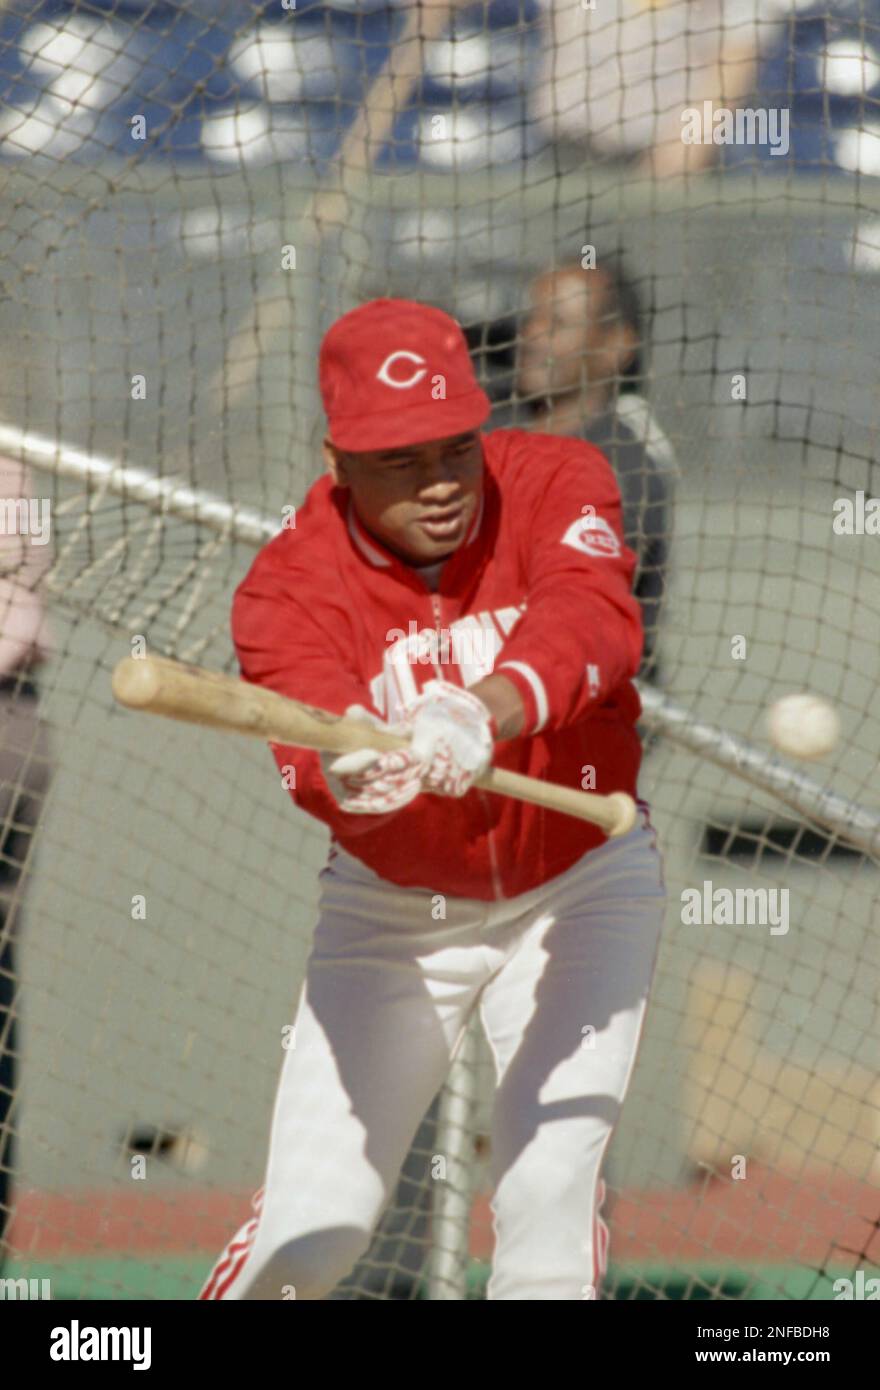 Cincinnati Reds pitcher Jose Rijo delivers in the early innings of World  Series game 4 in Oakland, Calif. Saturday, Oct. 20, 1990 against the  Athletics. (AP Photo/Rusty Kennedy Stock Photo - Alamy